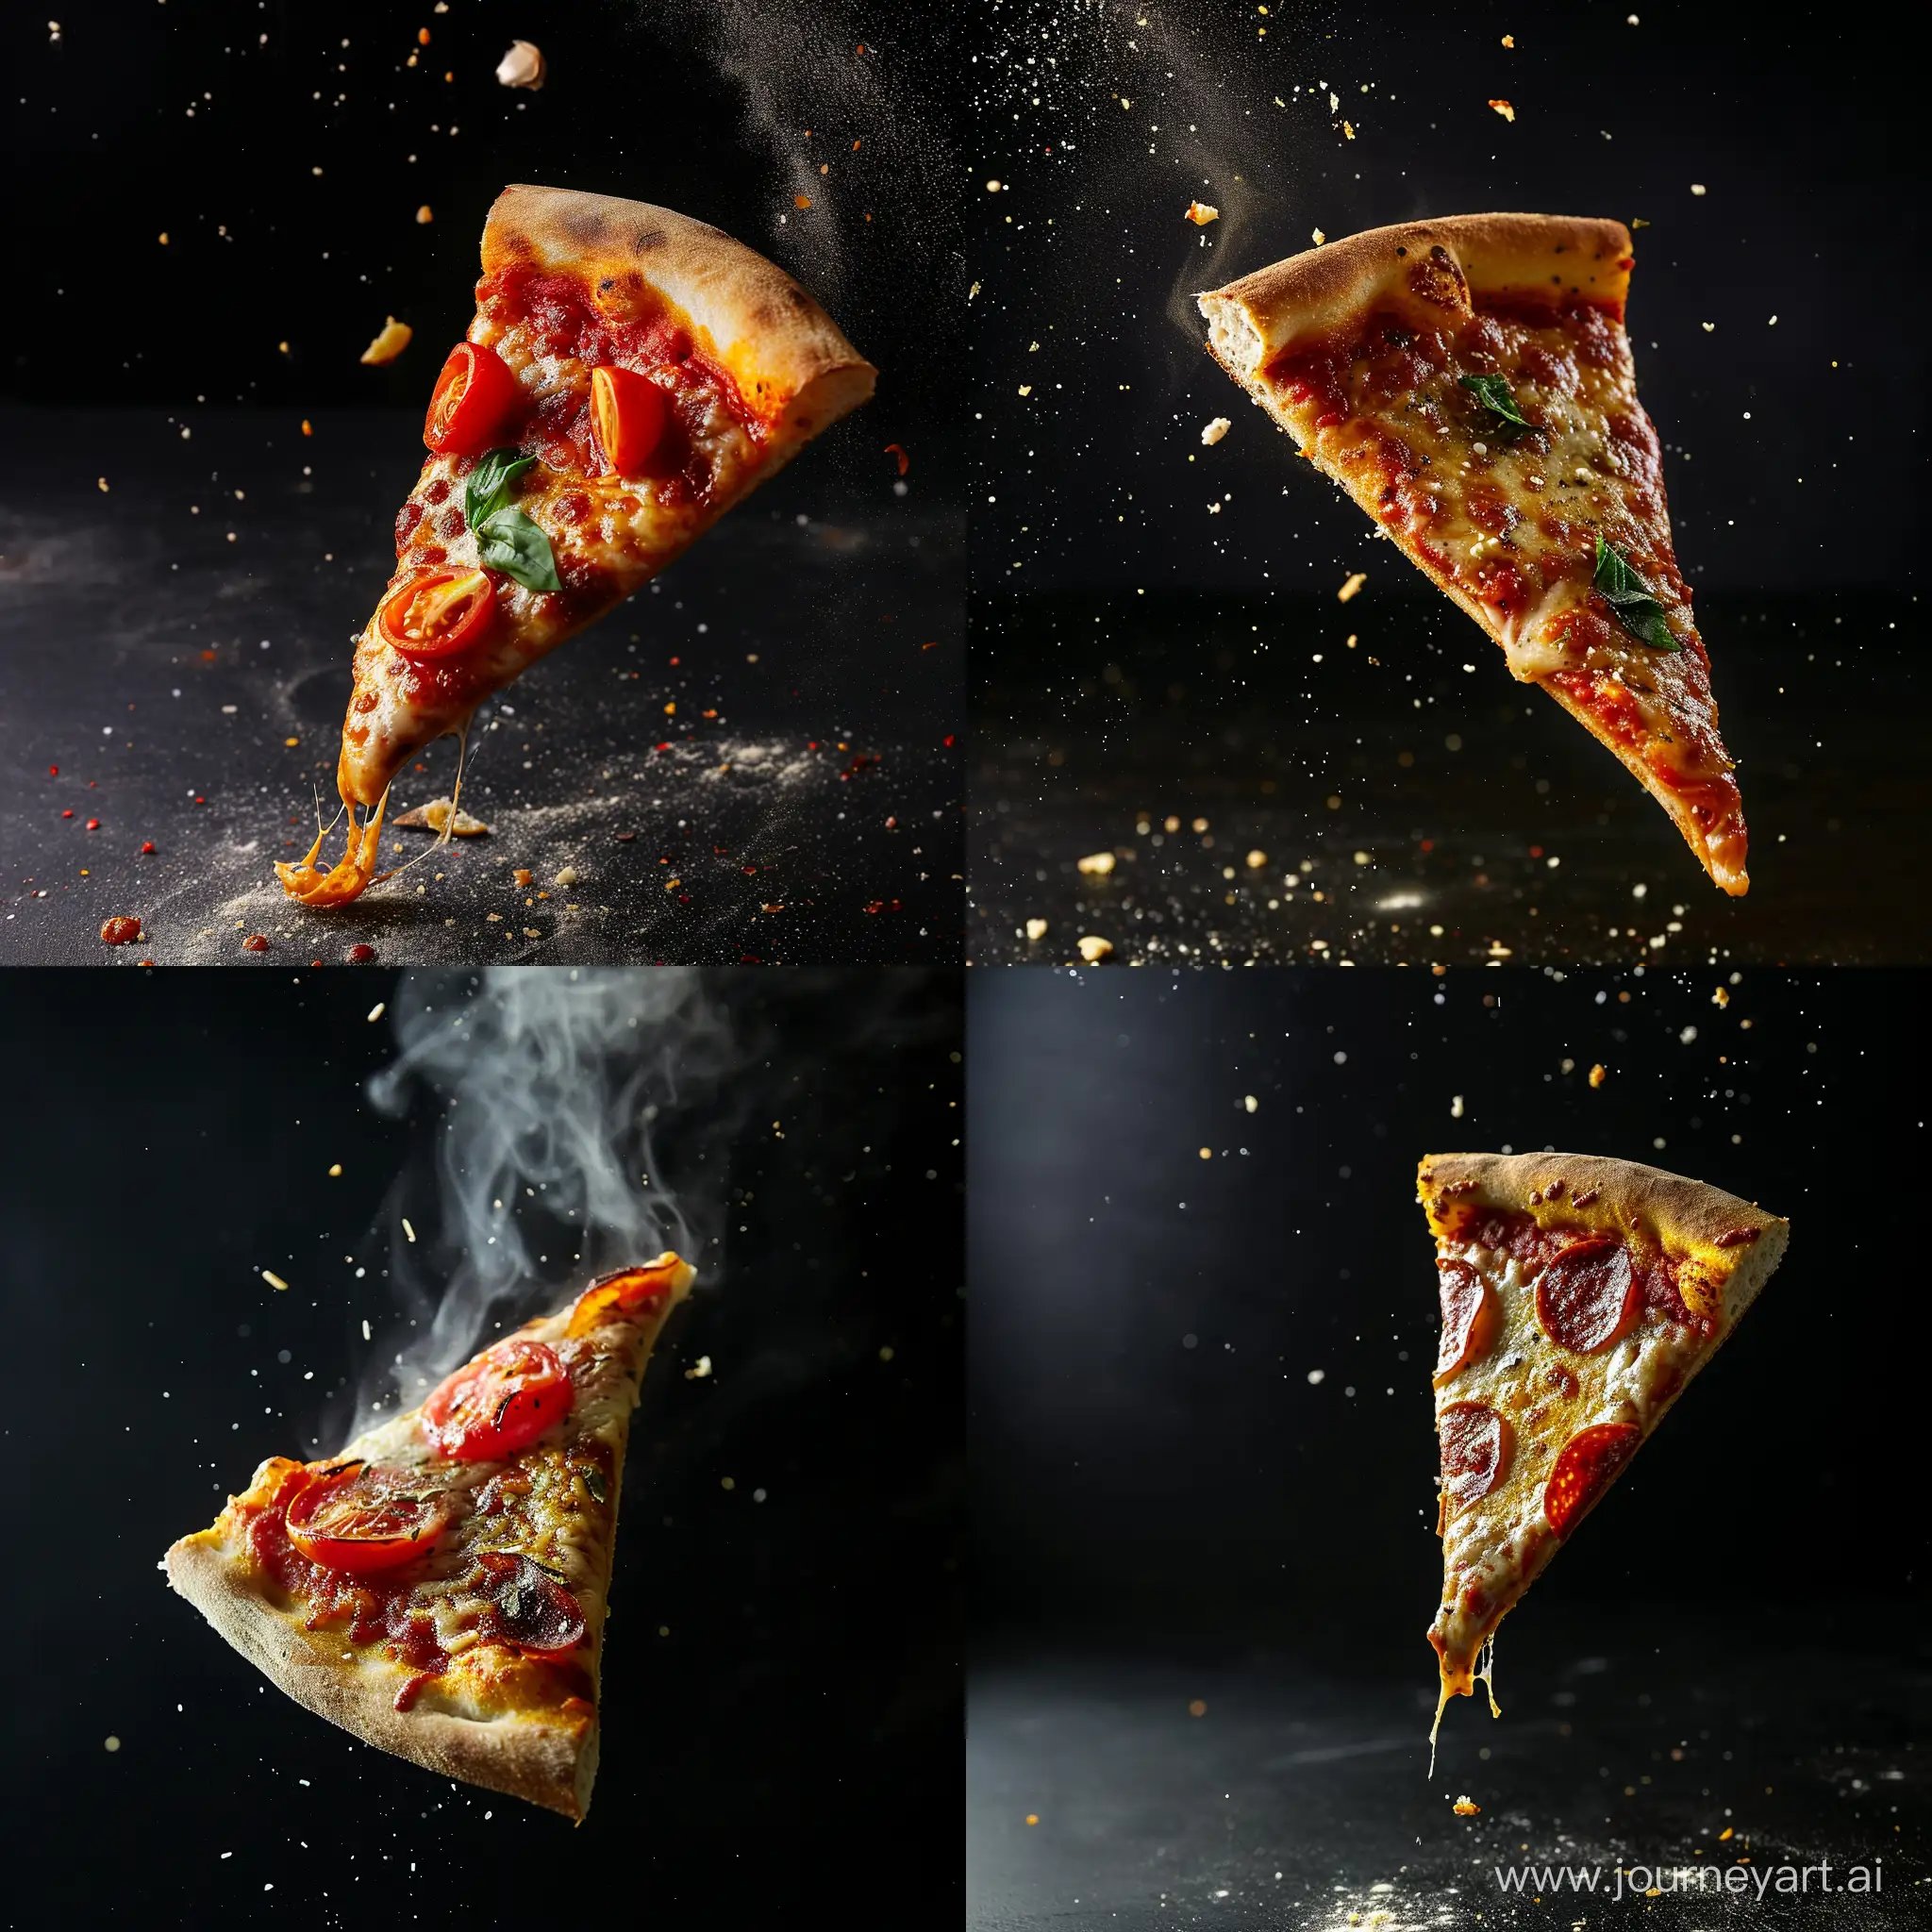 Delicious-Hot-Pizza-Slice-in-MidAir-on-Dramatic-Black-Background